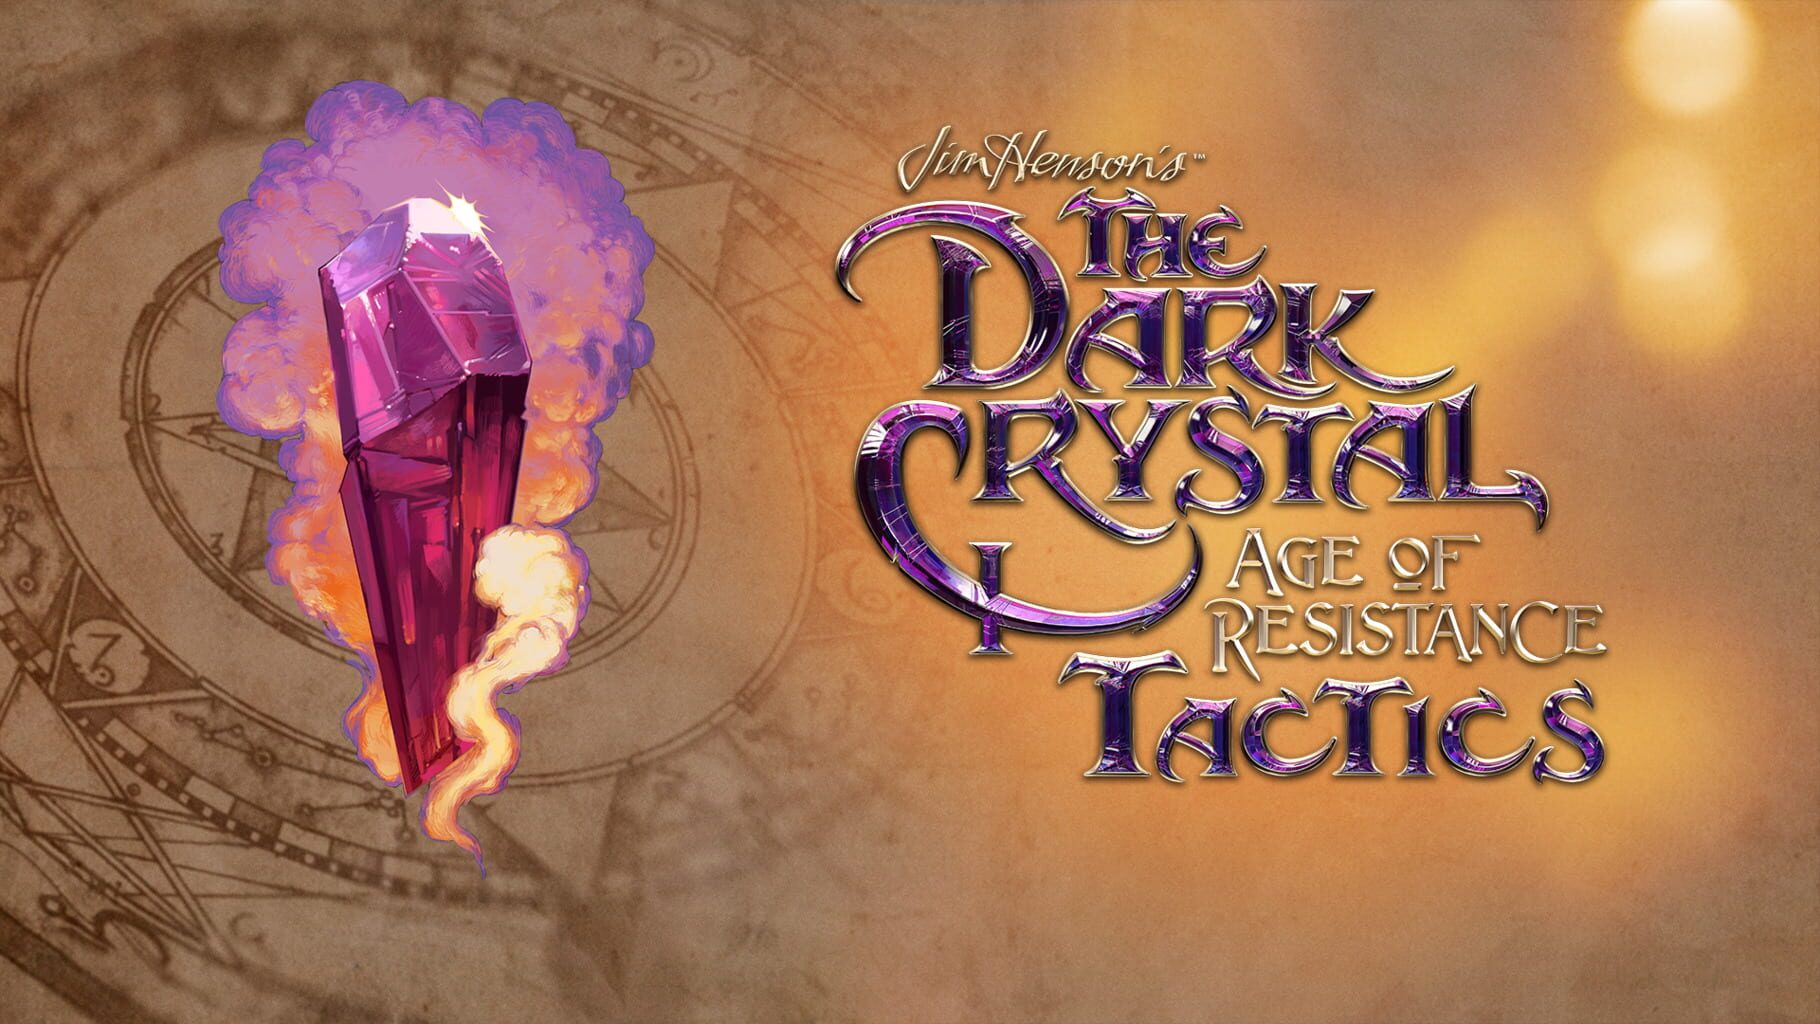 Artwork for The Dark Crystal: Age of Resistance Tactics